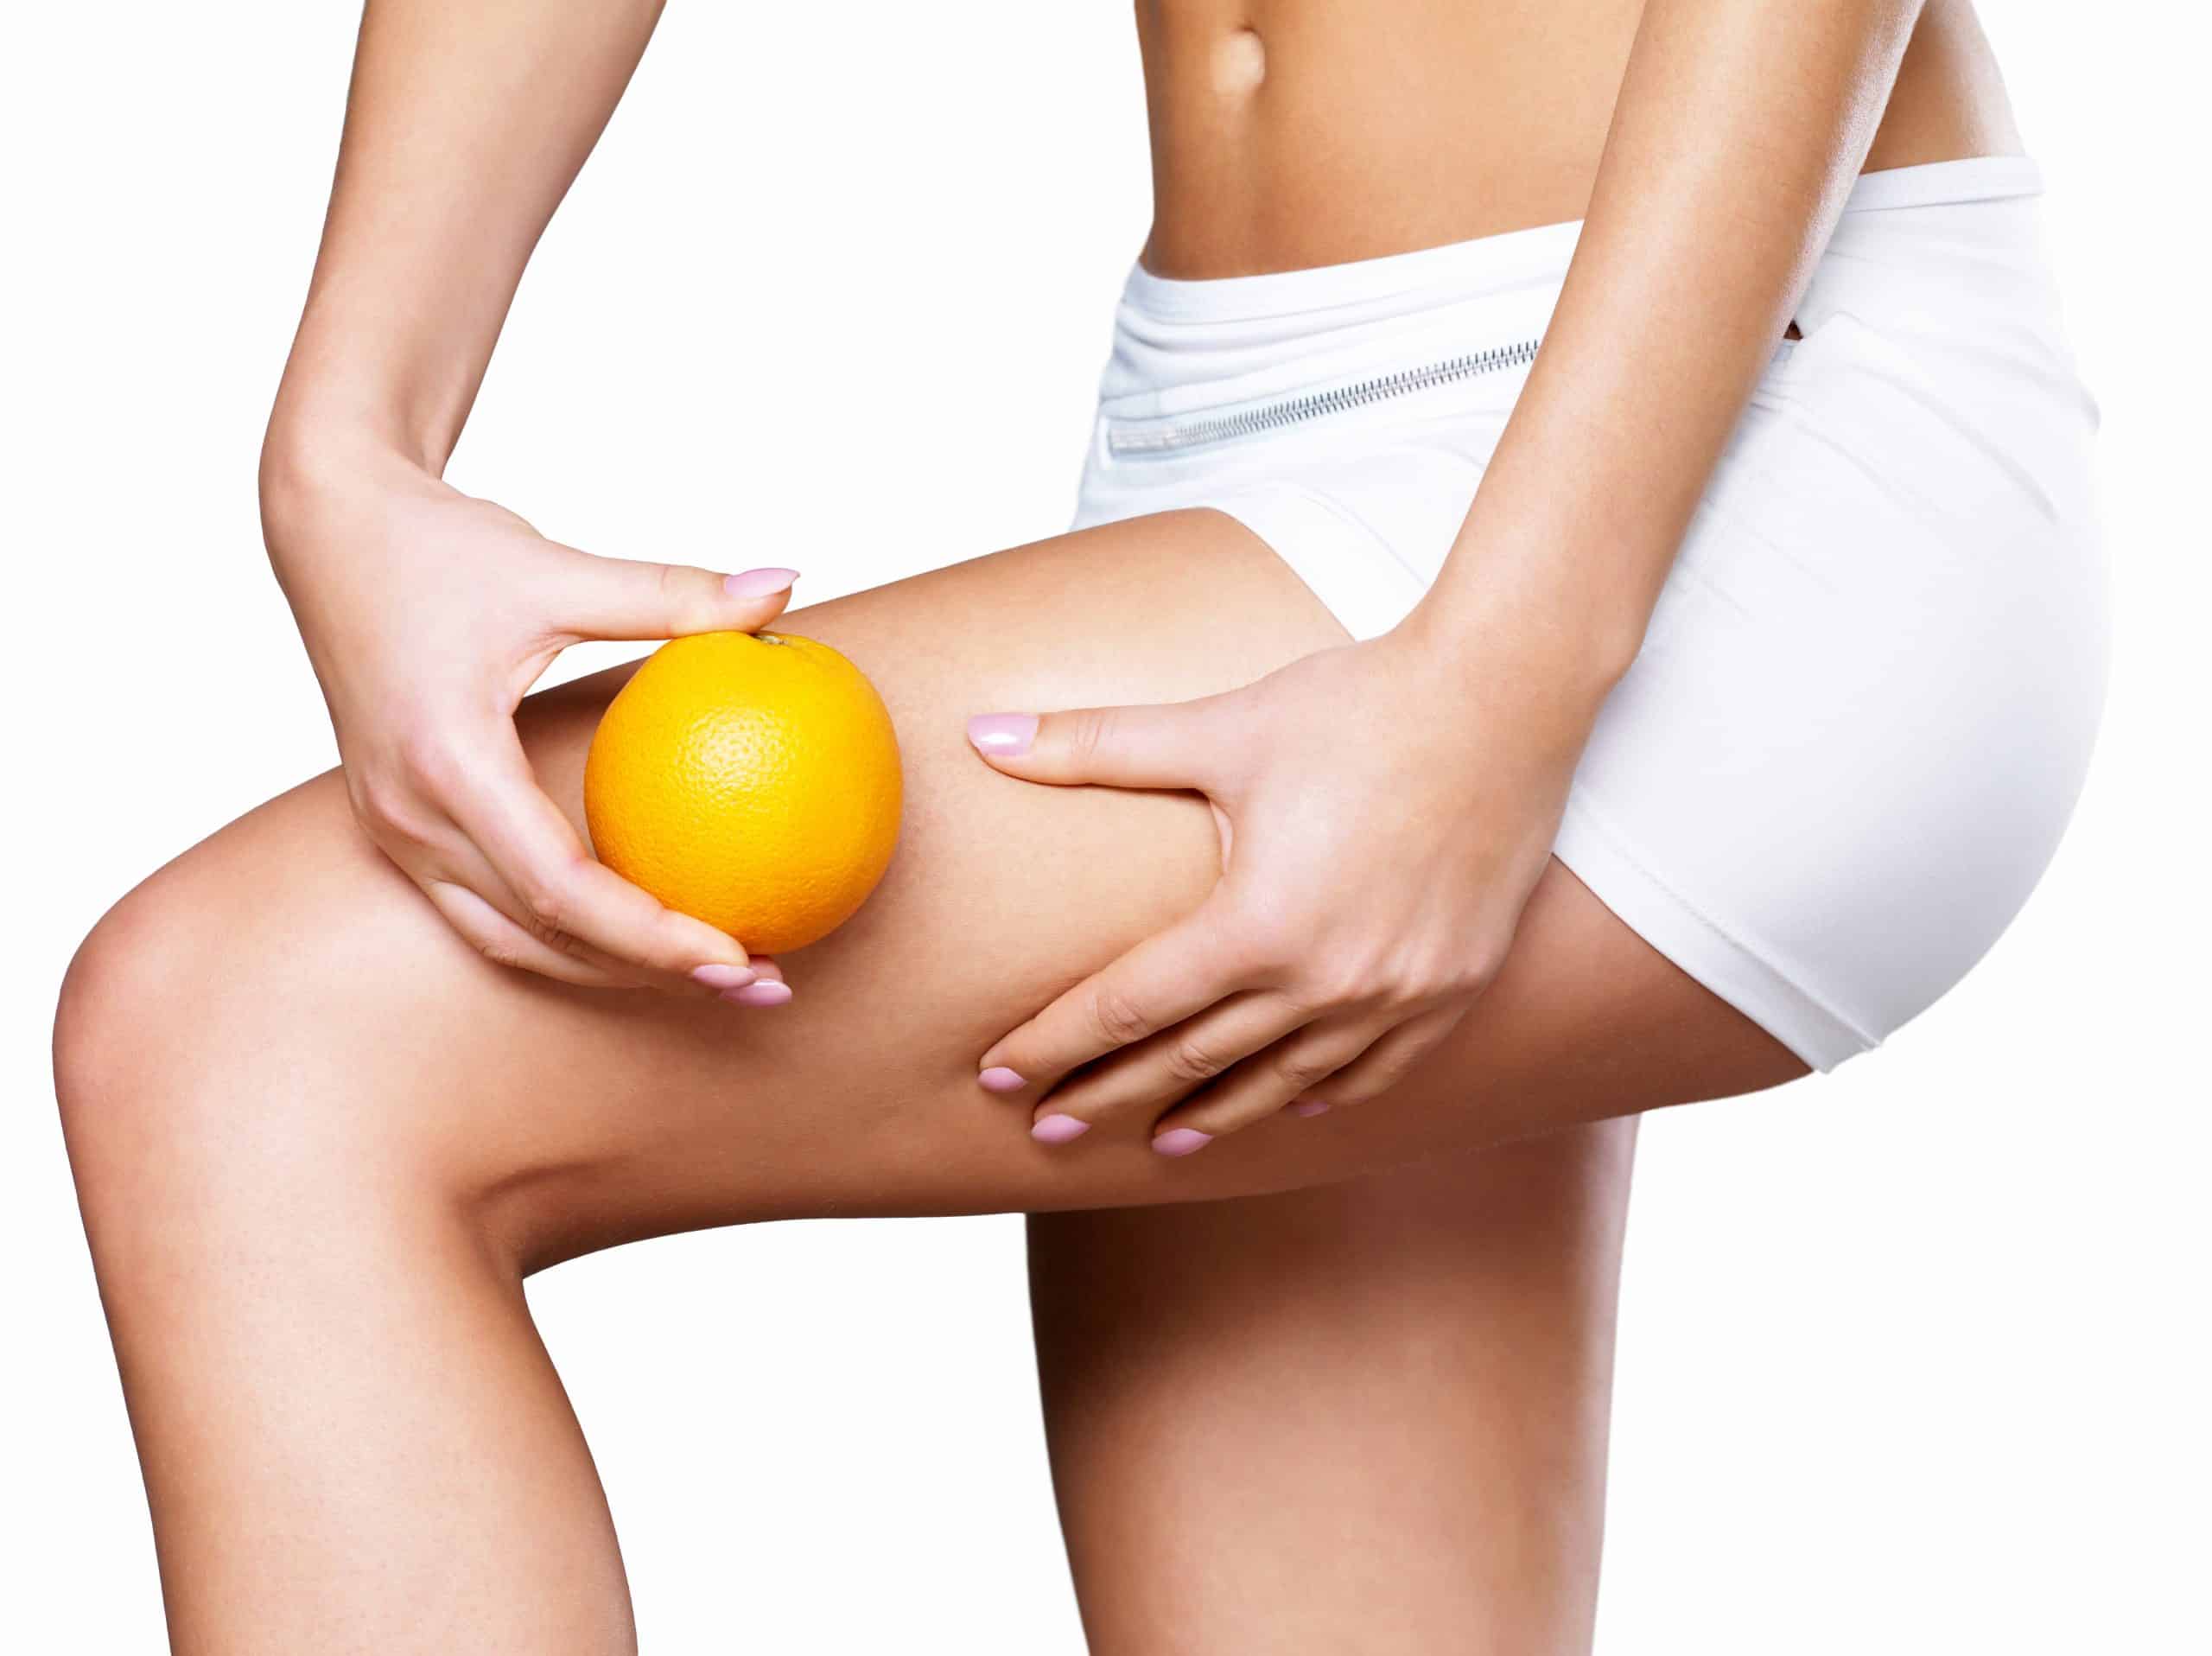 Having problems with “orange peel”? Here are the best ways to get rid of cellulite